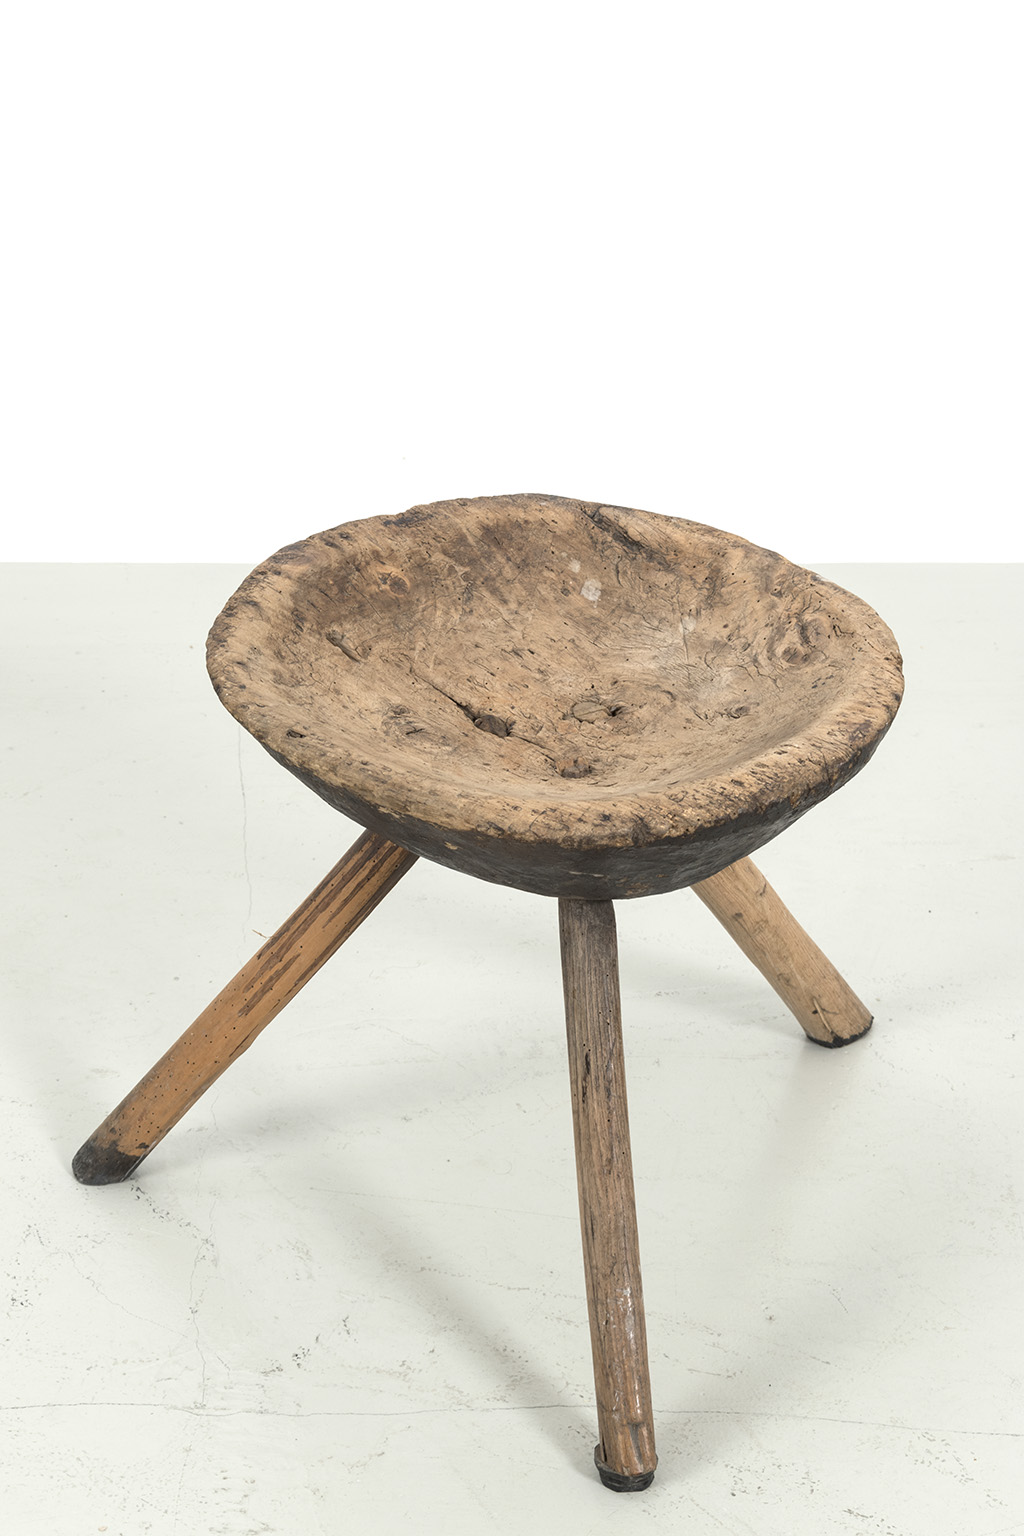 Very old wooden stool